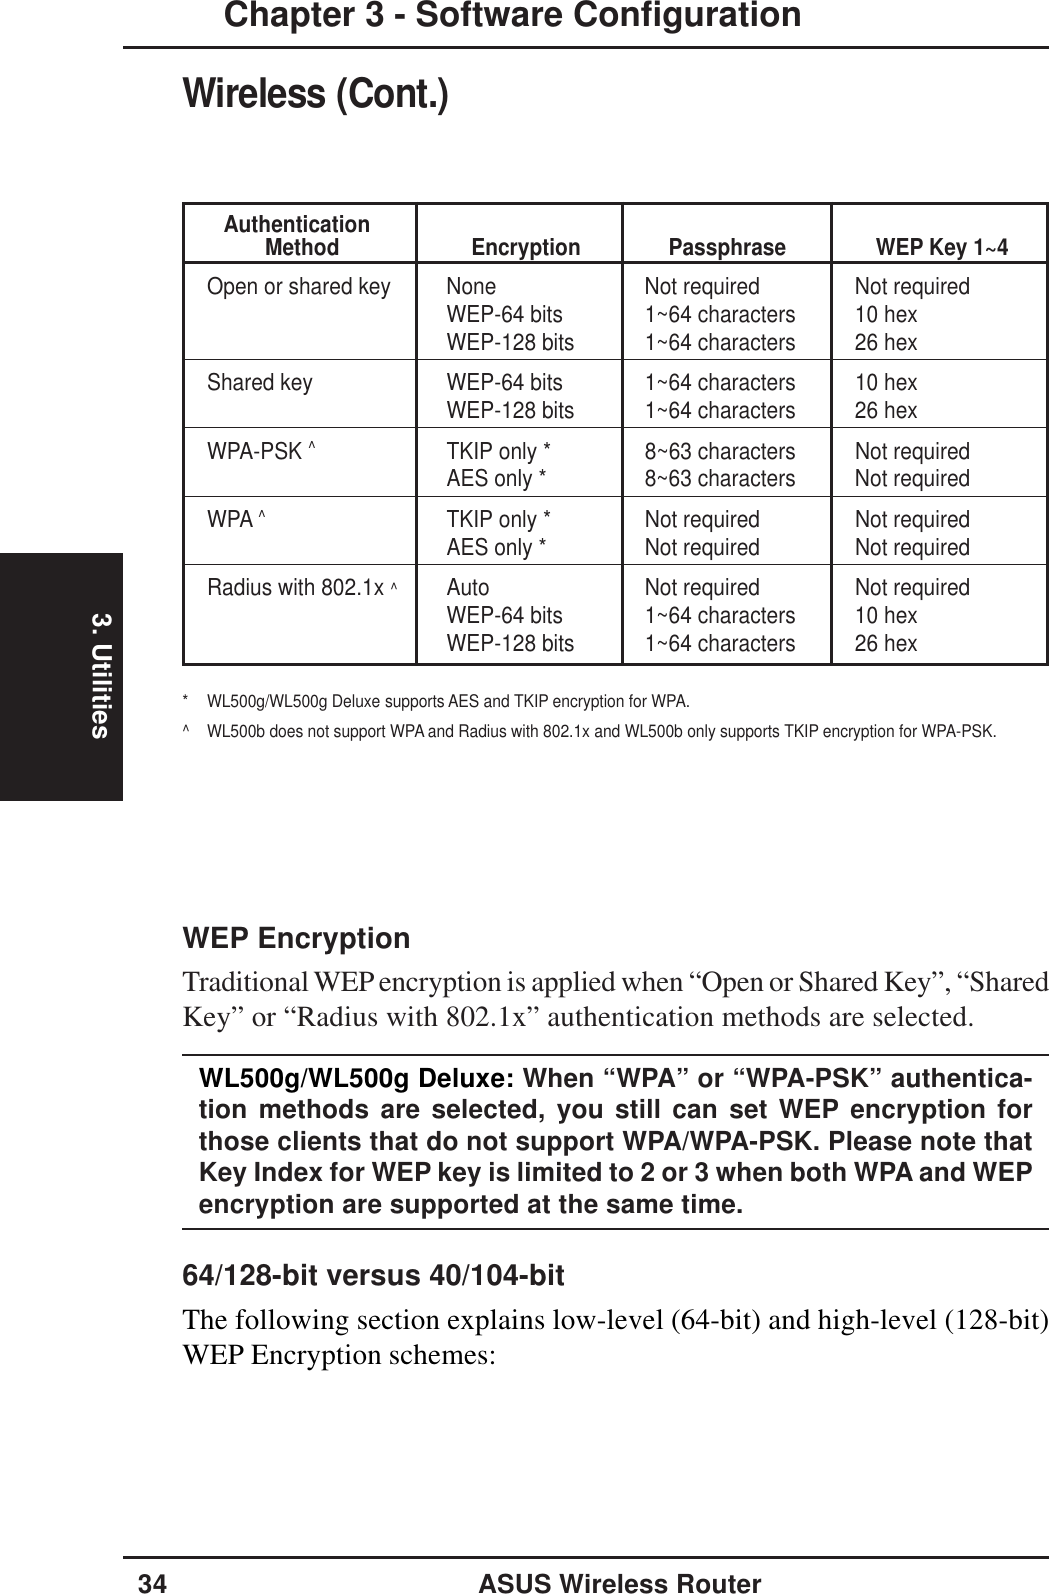 3. Utilities34 ASUS Wireless RouterChapter 3 - Software ConfigurationAuthenticationMethod Encryption Passphrase WEP Key 1~4Open or shared key None Not required Not requiredWEP-64 bits 1~64 characters 10 hexWEP-128 bits 1~64 characters 26 hexShared key WEP-64 bits 1~64 characters 10 hexWEP-128 bits 1~64 characters 26 hexWPA-PSK ^TKIP only * 8~63 characters Not requiredAES only * 8~63 characters Not requiredWPA ^TKIP only * Not required Not requiredAES only * Not required Not requiredRadius with 802.1x ^Auto Not required Not requiredWEP-64 bits 1~64 characters 10 hexWEP-128 bits 1~64 characters 26 hex* WL500g/WL500g Deluxe supports AES and TKIP encryption for WPA.^ WL500b does not support WPA and Radius with 802.1x and WL500b only supports TKIP encryption for WPA-PSK.WEP EncryptionTraditional WEP encryption is applied when “Open or Shared Key”, “SharedKey” or “Radius with 802.1x” authentication methods are selected.WL500g/WL500g Deluxe: When “WPA” or “WPA-PSK” authentica-tion methods are selected, you still can set WEP encryption forthose clients that do not support WPA/WPA-PSK. Please note thatKey Index for WEP key is limited to 2 or 3 when both WPA and WEPencryption are supported at the same time.64/128-bit versus 40/104-bitThe following section explains low-level (64-bit) and high-level (128-bit)WEP Encryption schemes:Wireless (Cont.)